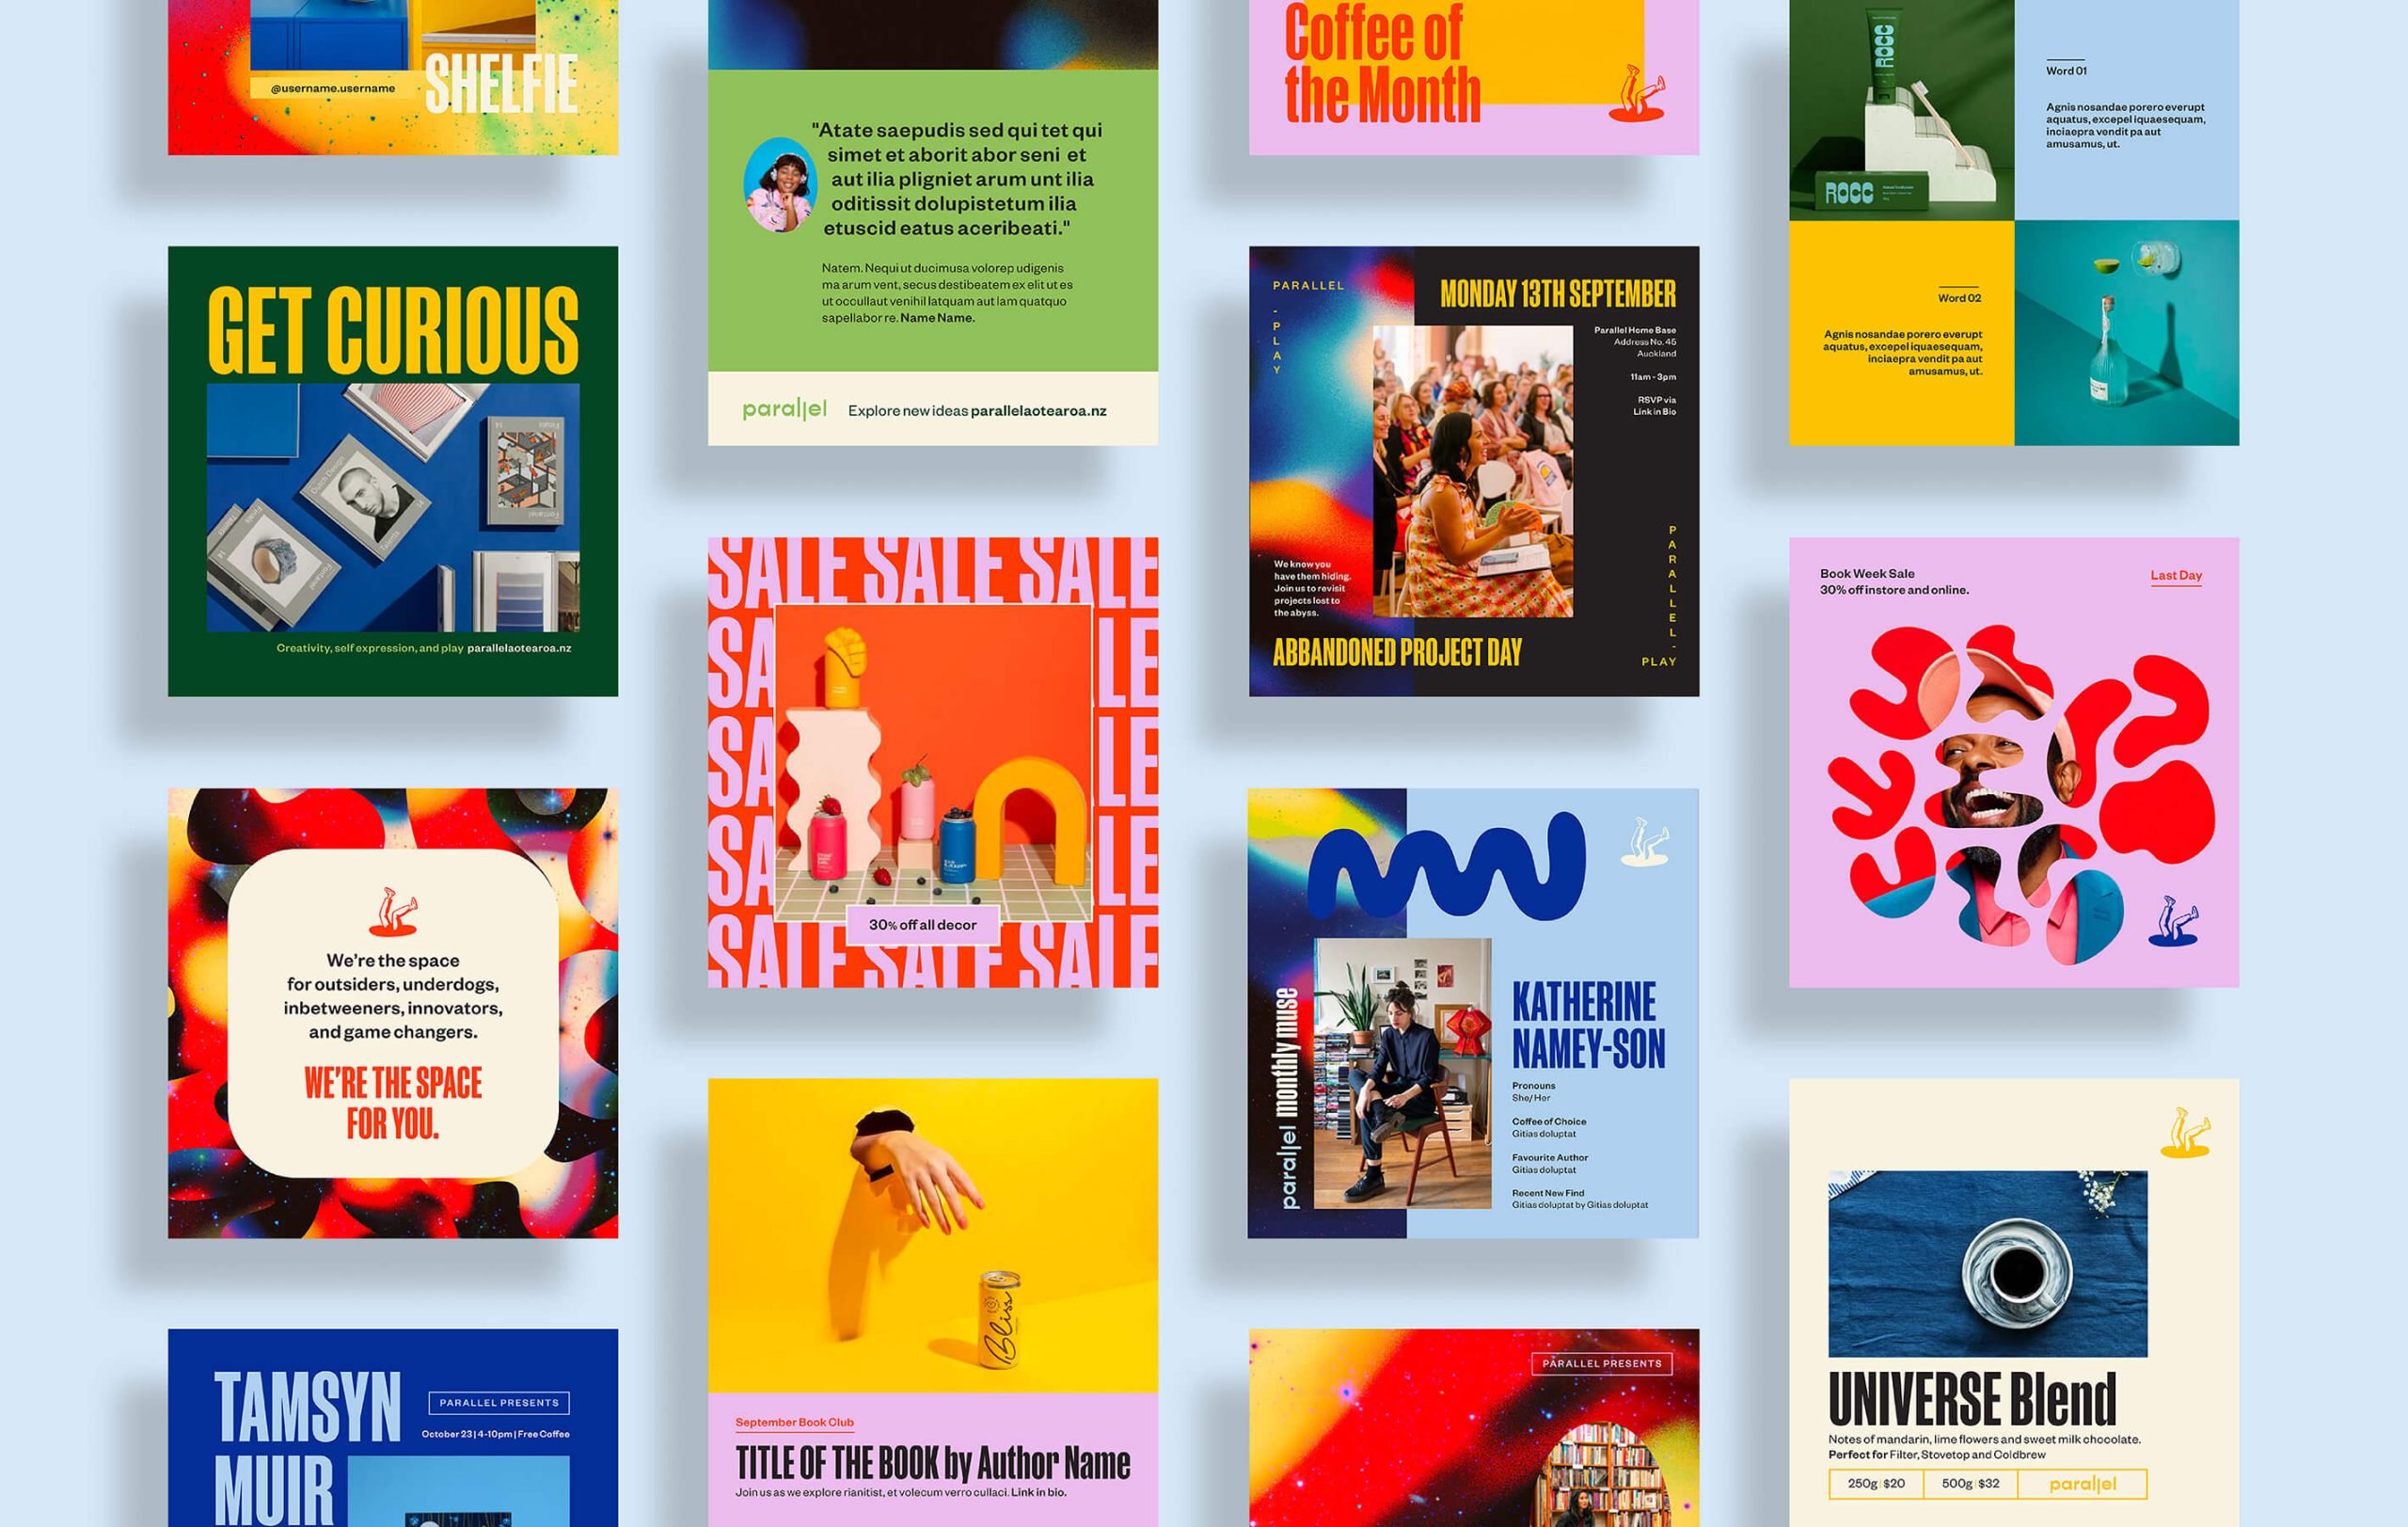 Brand identity case study image of Parallel’s social media templates. The imagery shows the bright brand colour palette, blobby support graphics, space gradients and clean typography.